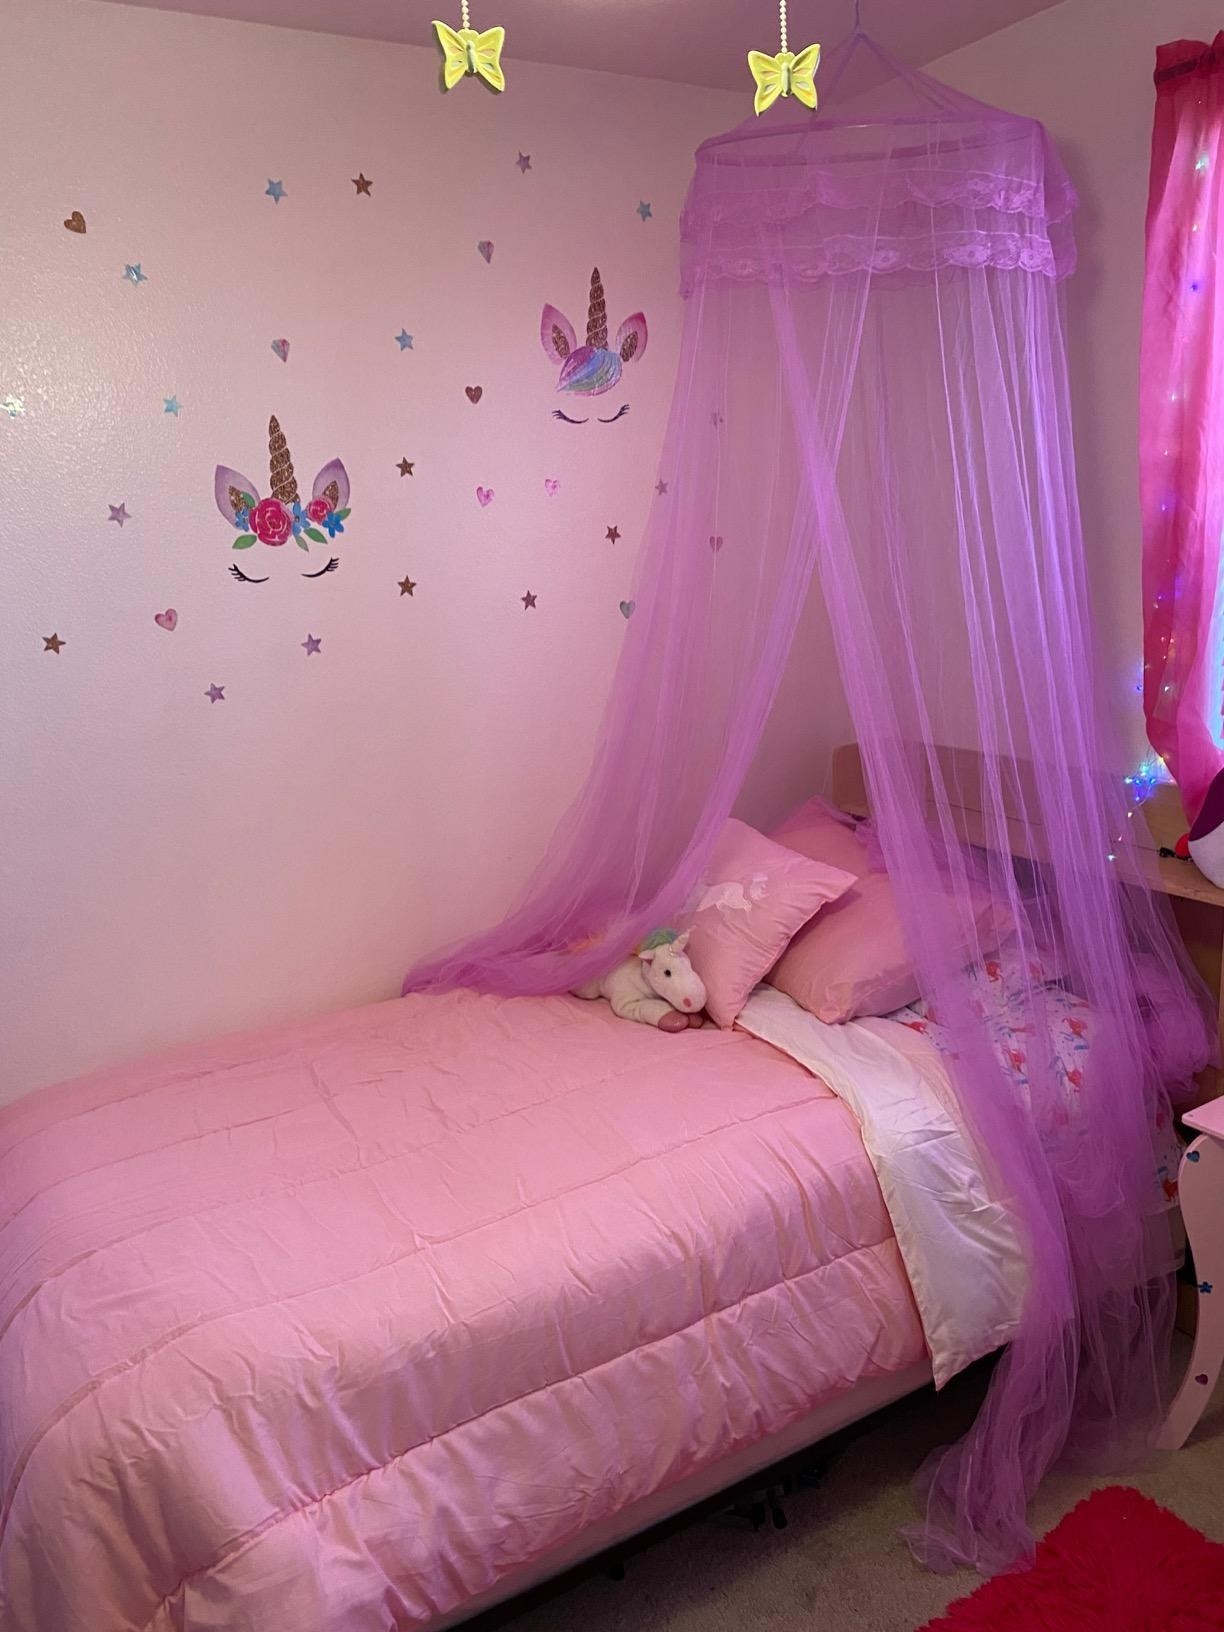 Reviewer's photo showing the sheer canopy in purple installed over their child's bed